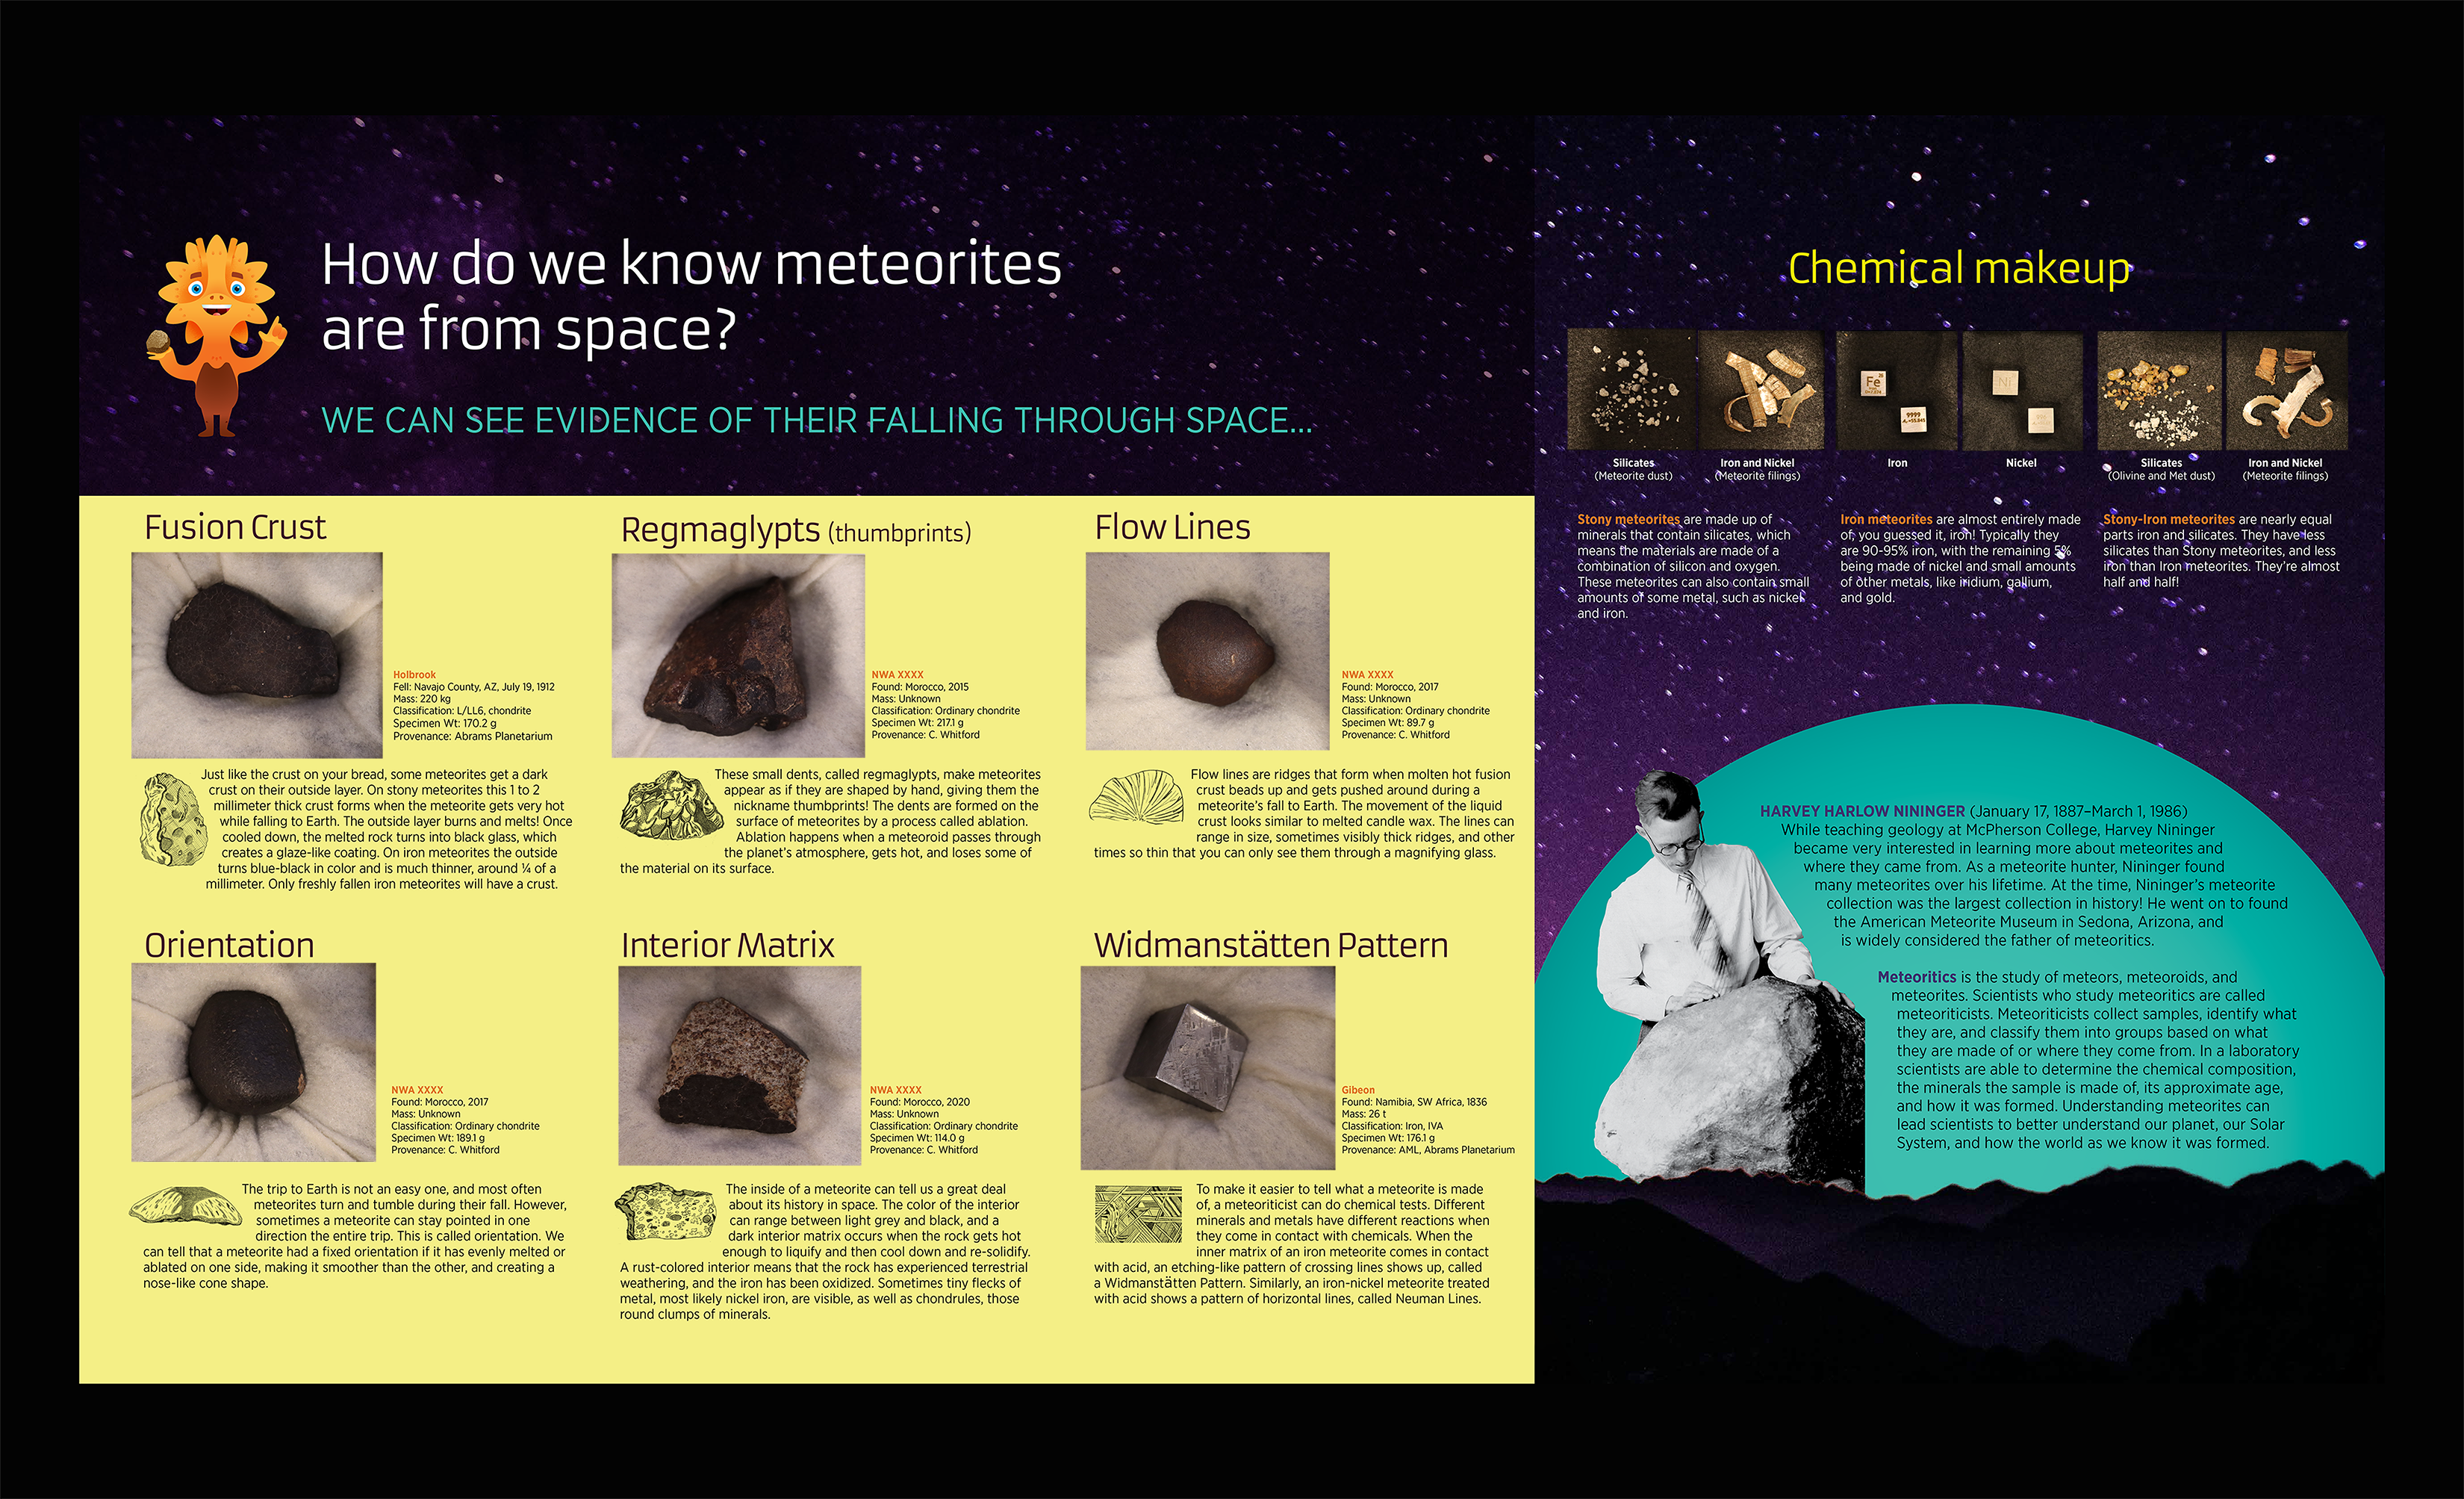 How do we know meteorites are from space?